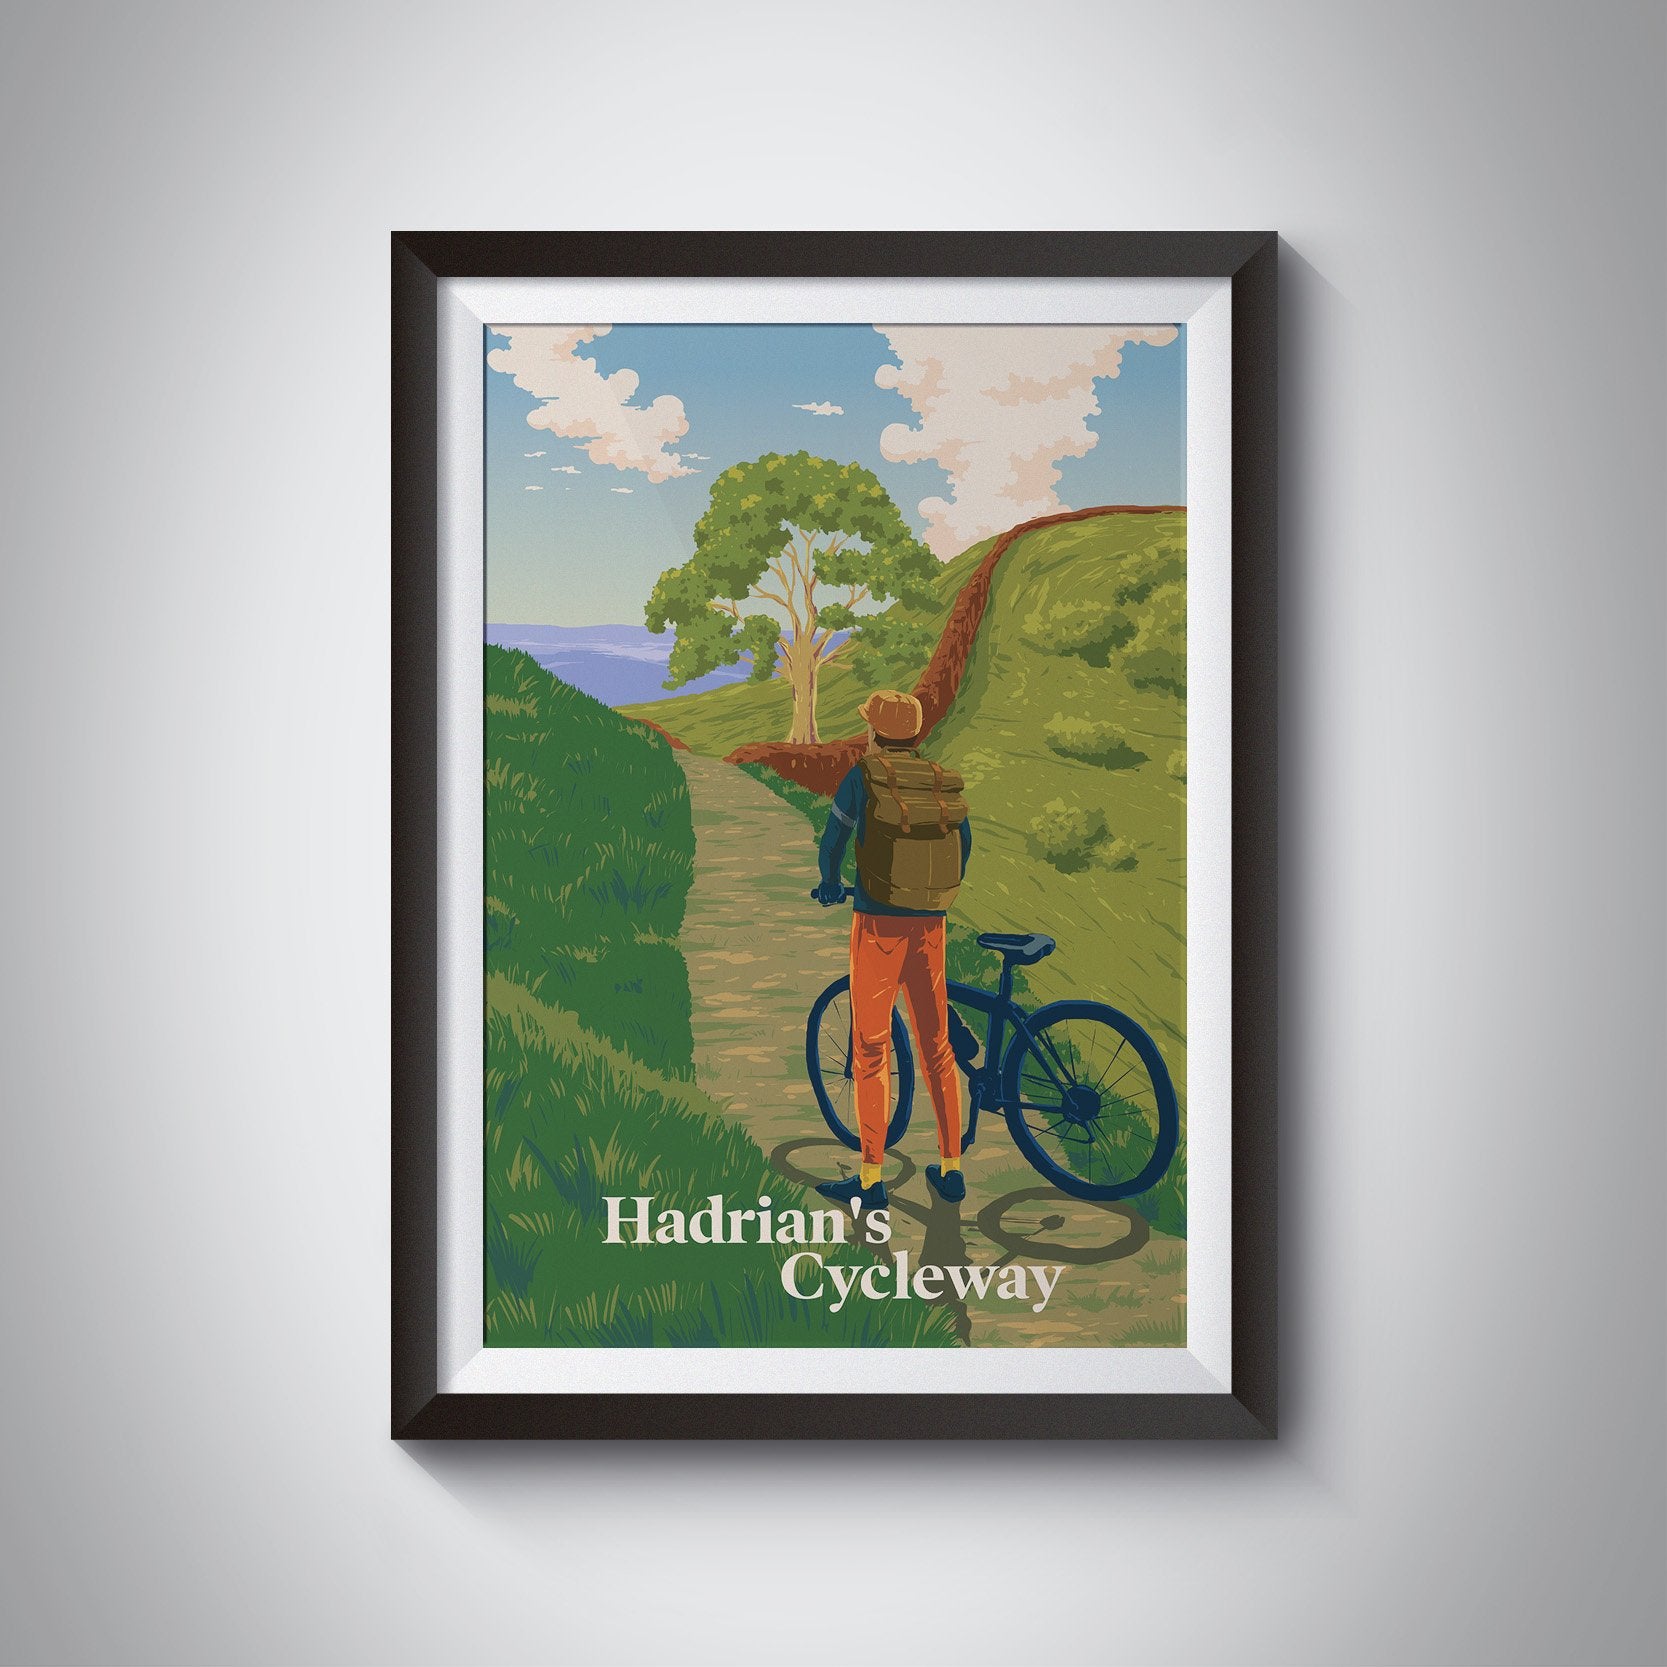 Hadrian's Cycleway Cycling Travel Poster